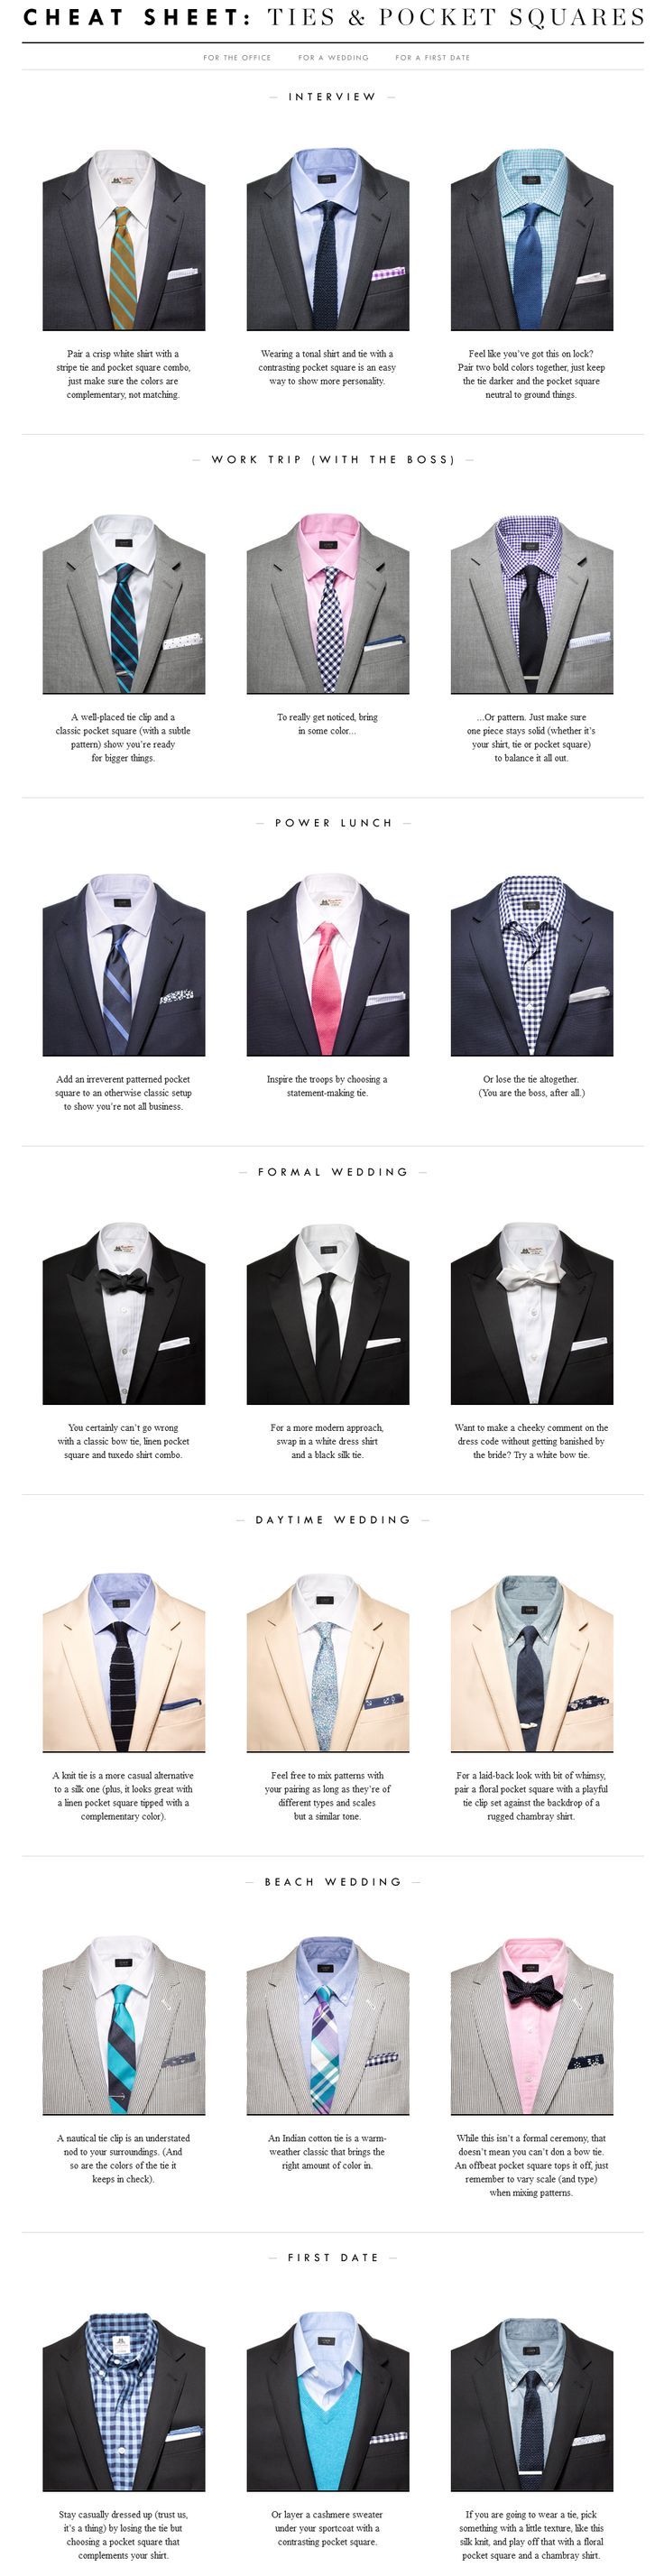 tie and pocket square combination rules, ties and pocket squares cheat sheet